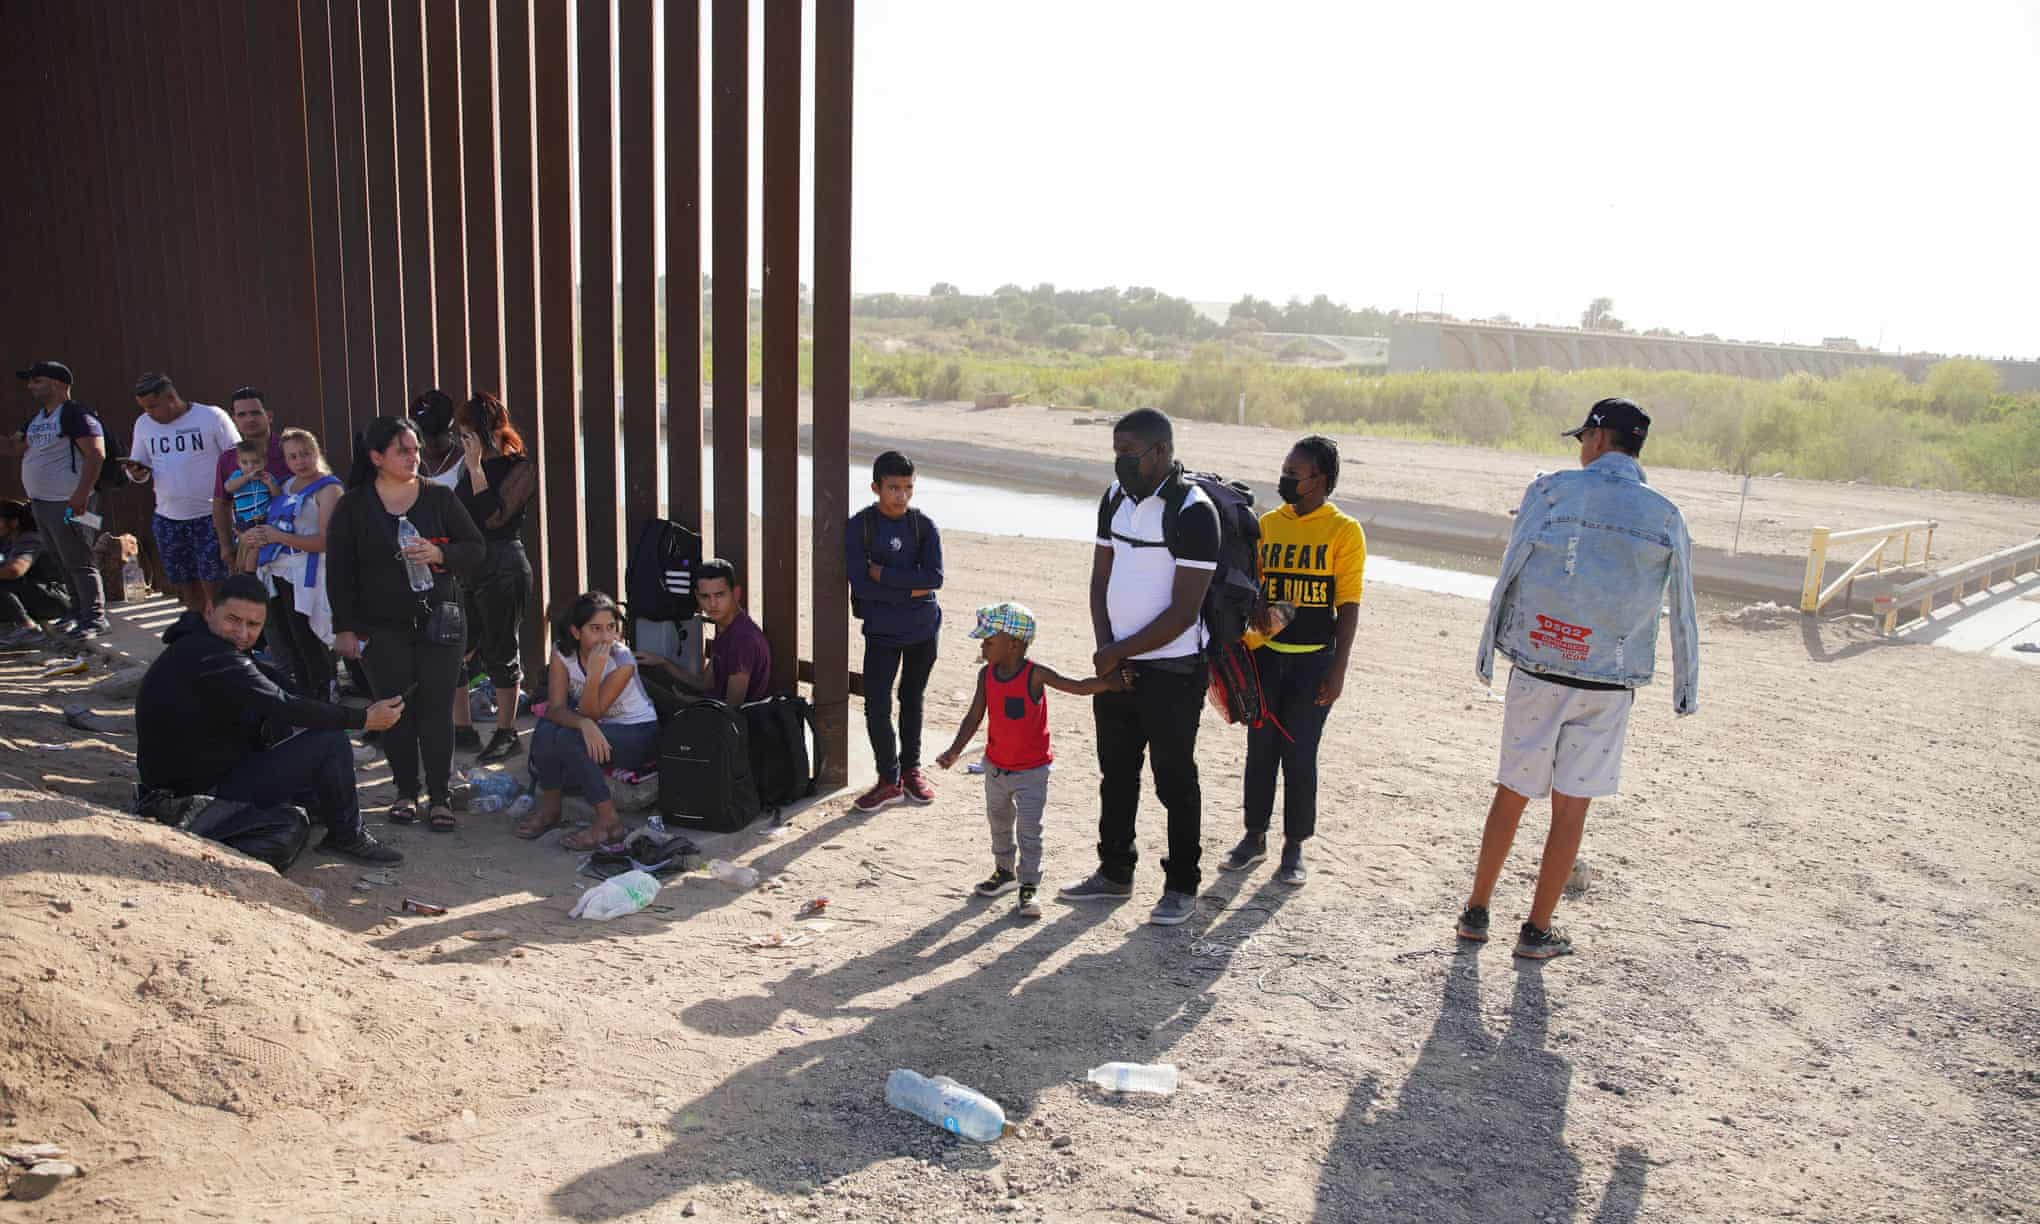 Clothes, shoes, passports: Migrants forced to dump possessions at US-Mexico wall￼ (theguardian.com)